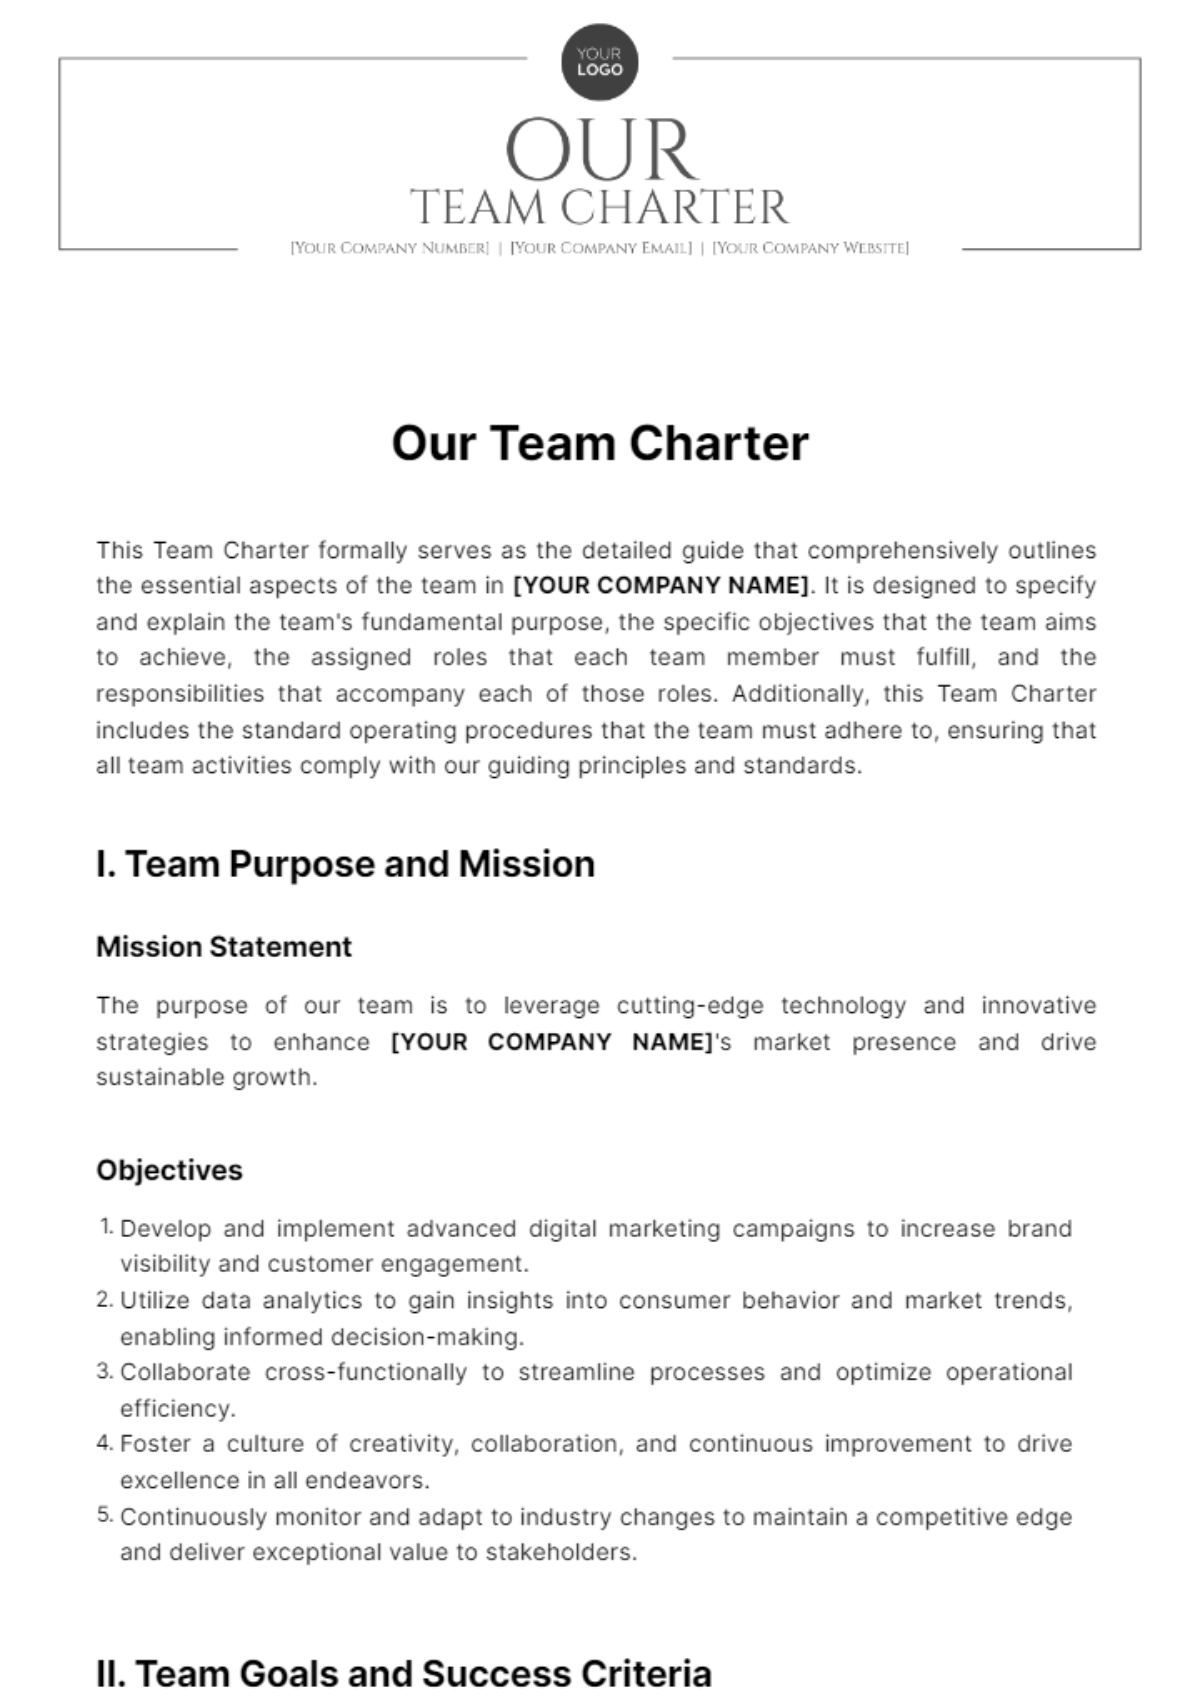 Our Team Charter Template